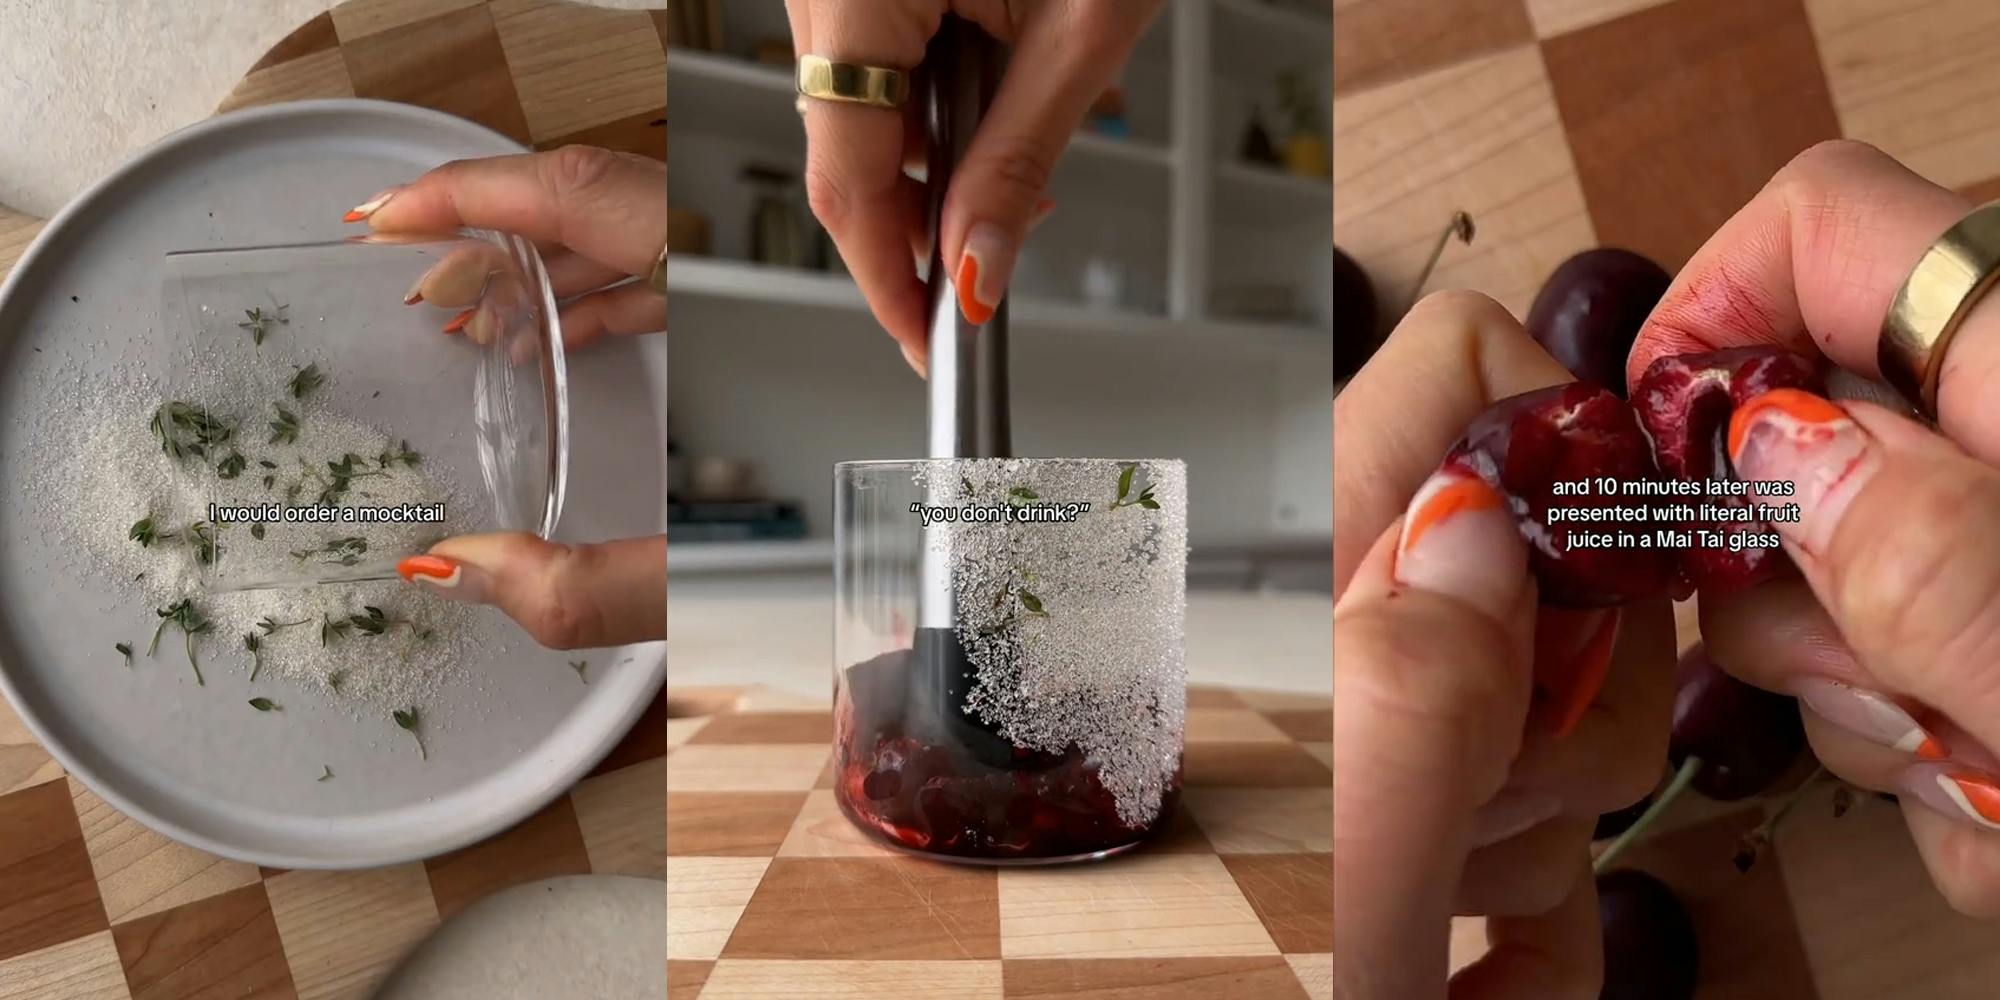 hand rolling glass onto plate with caption "I would order a mocktail" (l) hand using tongs in cup with caption ""you don't drink?"" (l) hands peeling cherry in half with caption "and 10 minutes later was presented with literal fruit juice in a Mai Tai glass" (r)